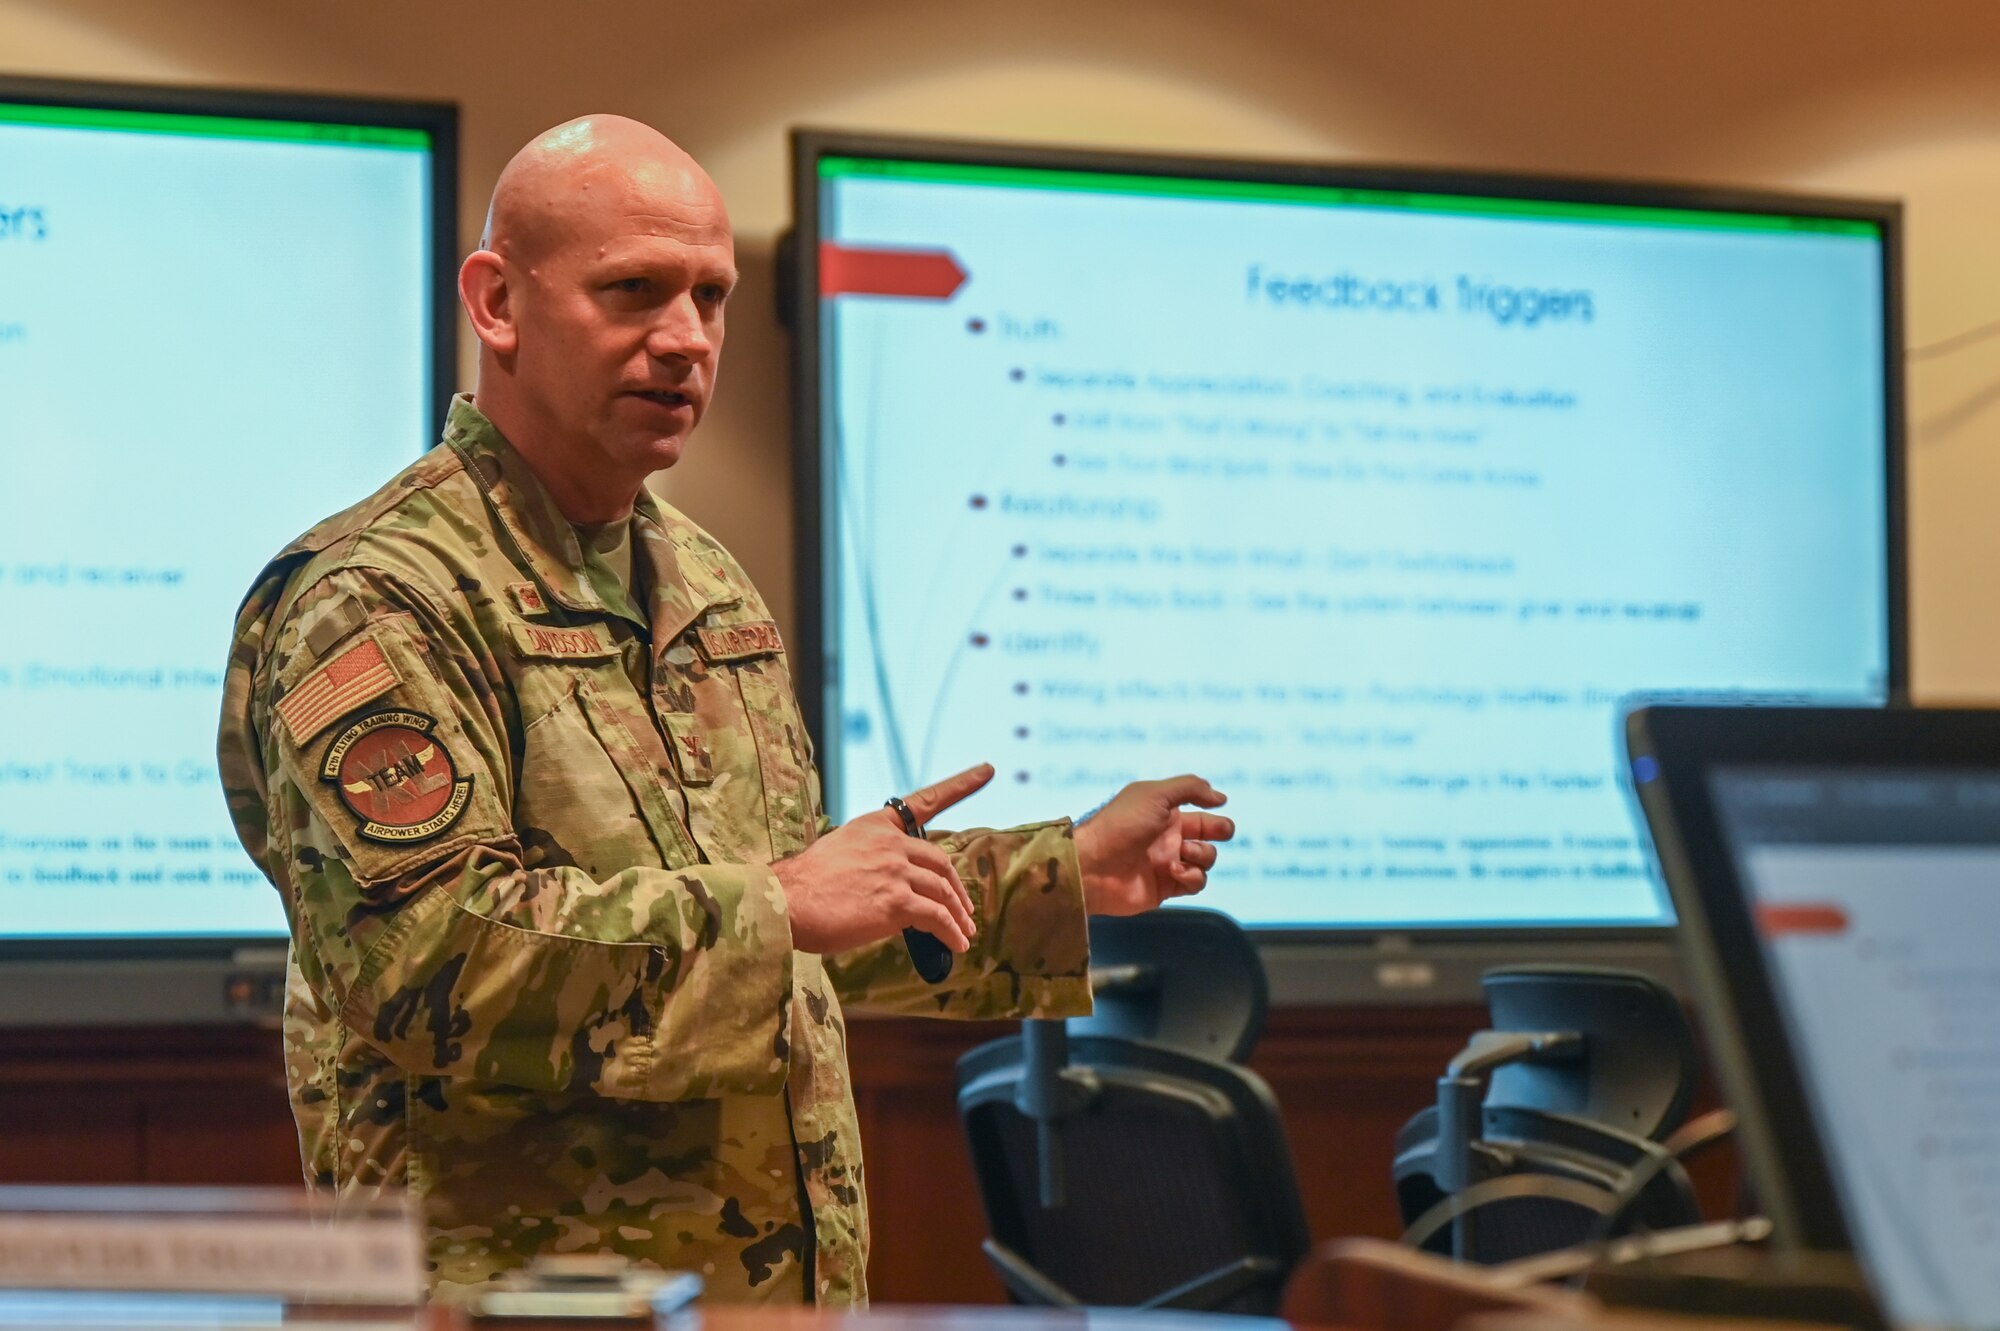 U.S. Air Force Col. Davidson, 47th Flying Training Wing commander, discusses feedback with his commanders during a professional development session at Laughlin Air Force Base, Texas, on March 22, 2023. The group explored the concepts outlined in the book "Thanks for the Feedback" and how they apply to the Air Force's core values of integrity, service, and excellence. (U.S. Air Force photo by Airman 1st Class Keira Rossman)